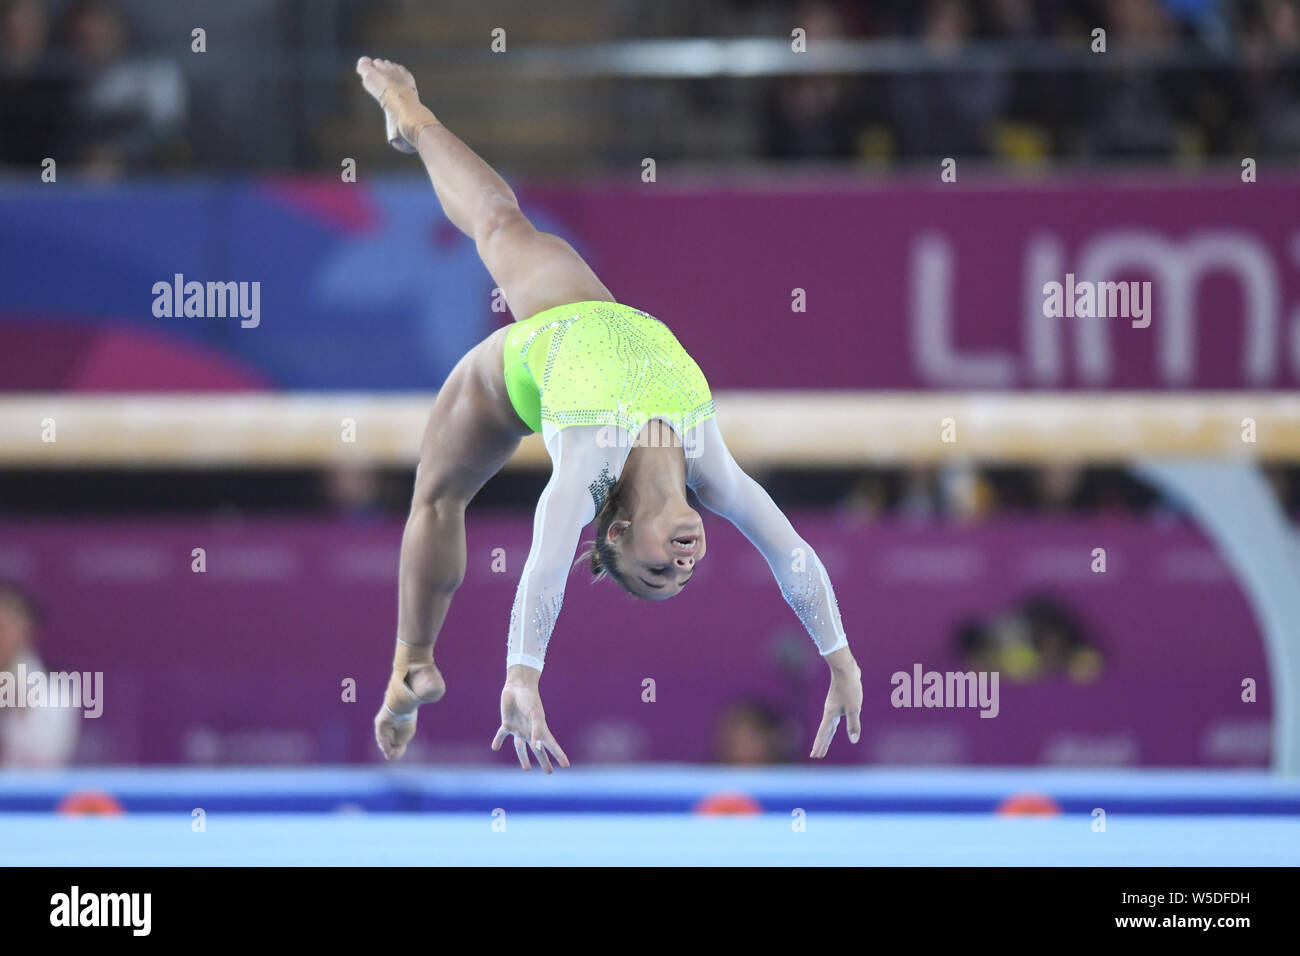 July 27, 2019, Lima, Peru: FLAVIA SARAIVA from Brazil competes on the floor exercise during the team finals competition held in the Polideportivo Villa El Salvador  in Lima, Peru. (Credit Image: © Amy Sanderson/ZUMA Wire) Stock Photo